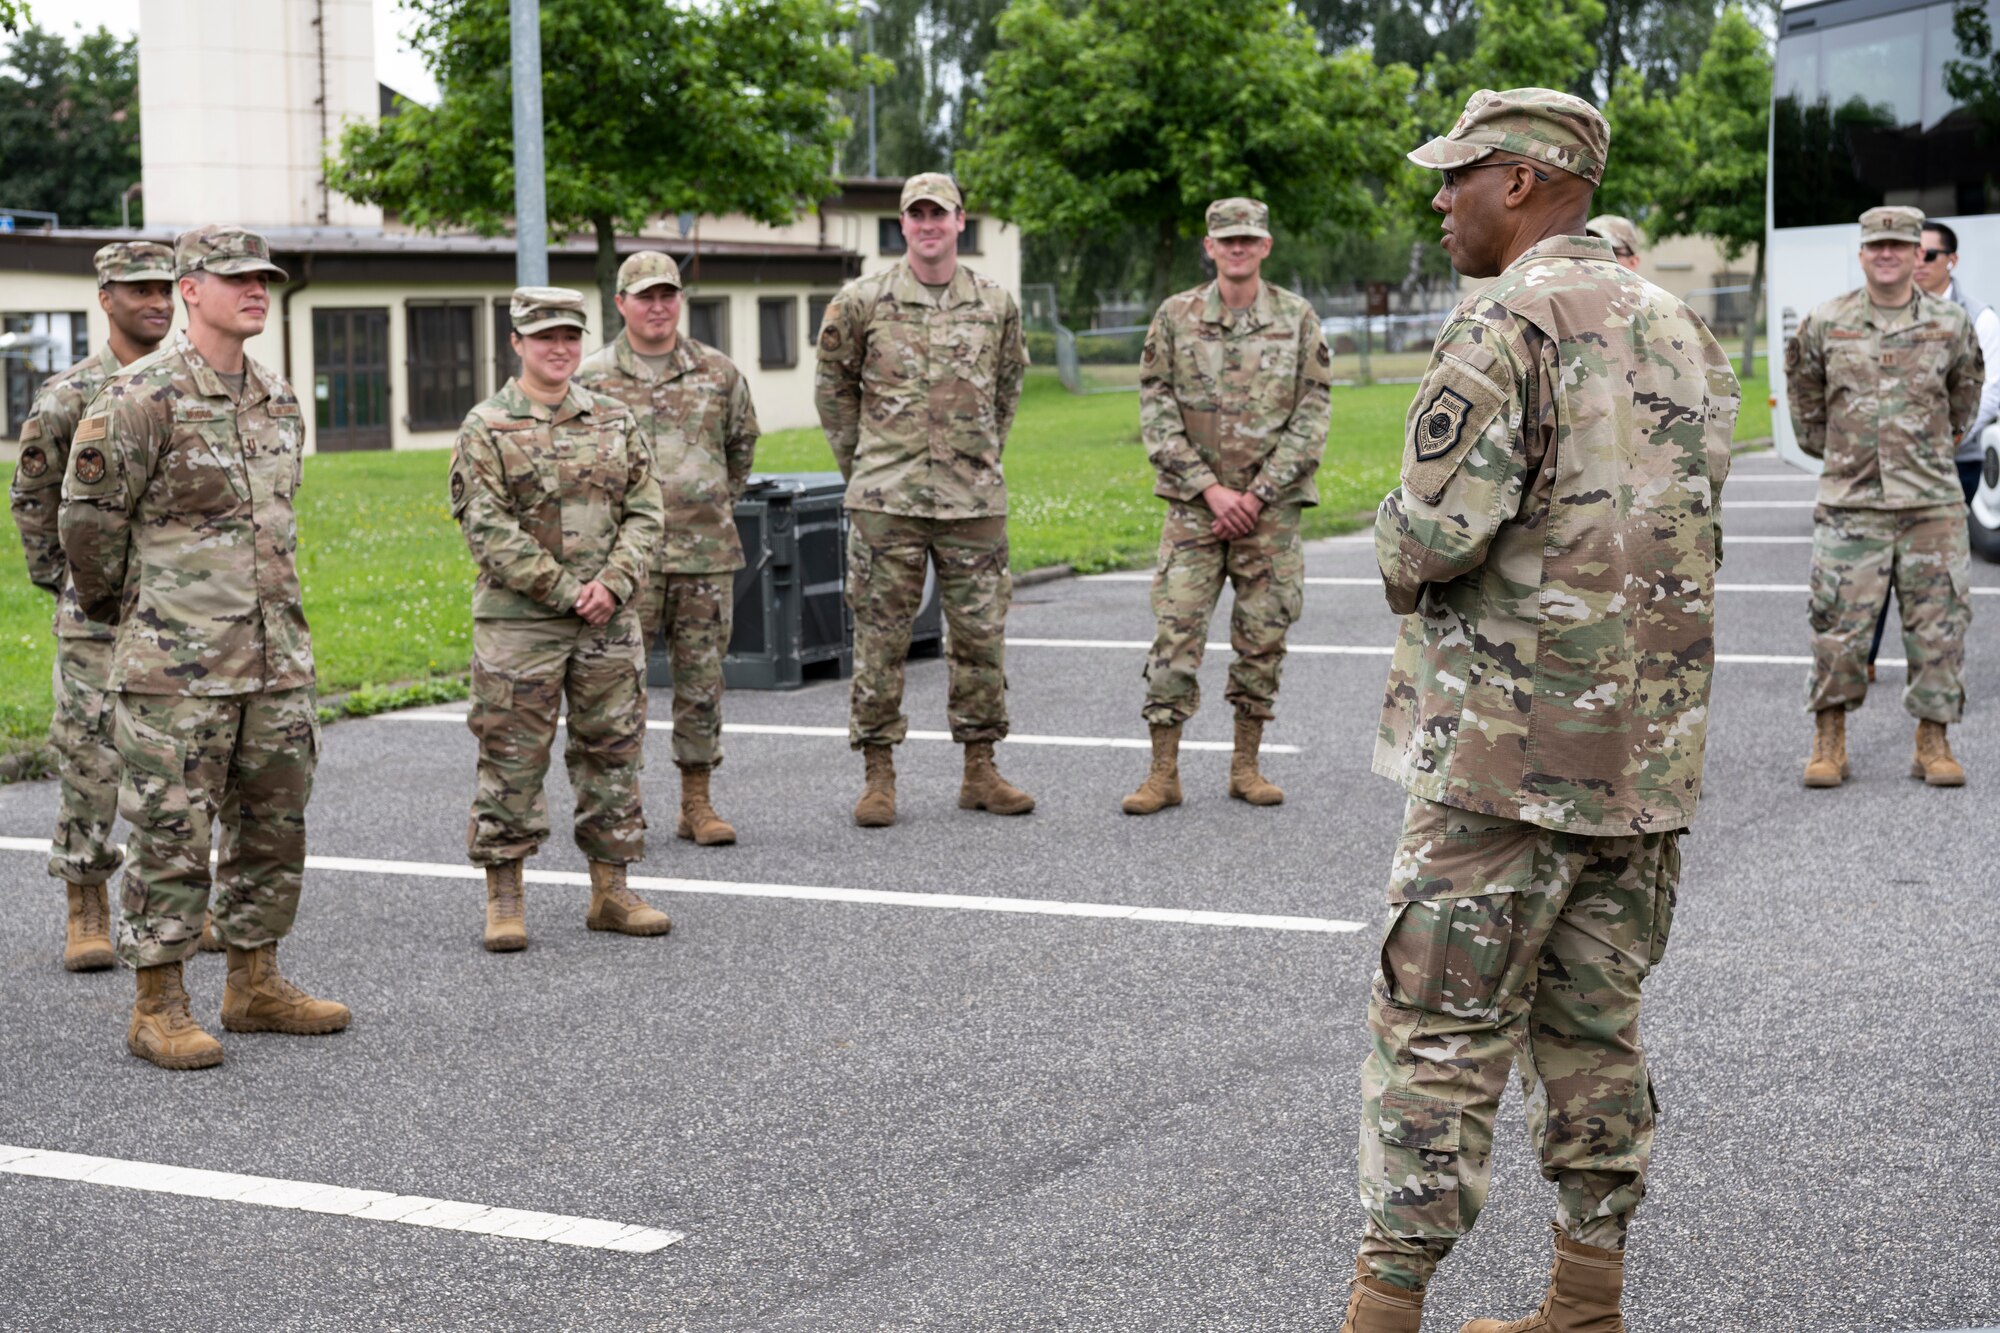 U.S. Air Force Chief of Staff Gen. CQ Brown Jr. speaks with Airmen at the 52nd Fighter Wing Restriction of Movement (ROM) village July 16, 2021, on Spangdahlem Air Base, Germany.